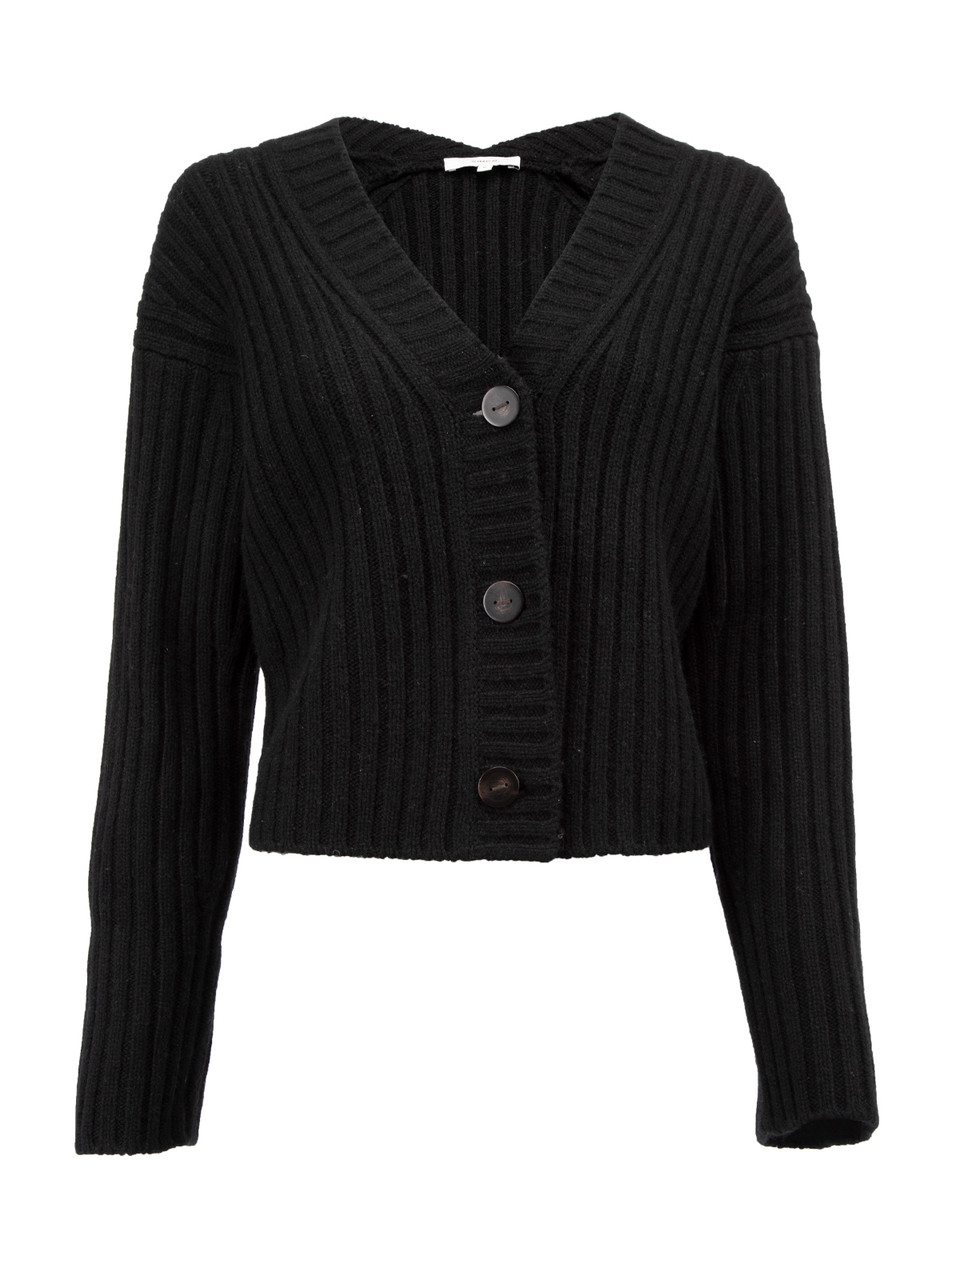 Vince Black Wool and Cashmere Cropped Button Up Cardigan